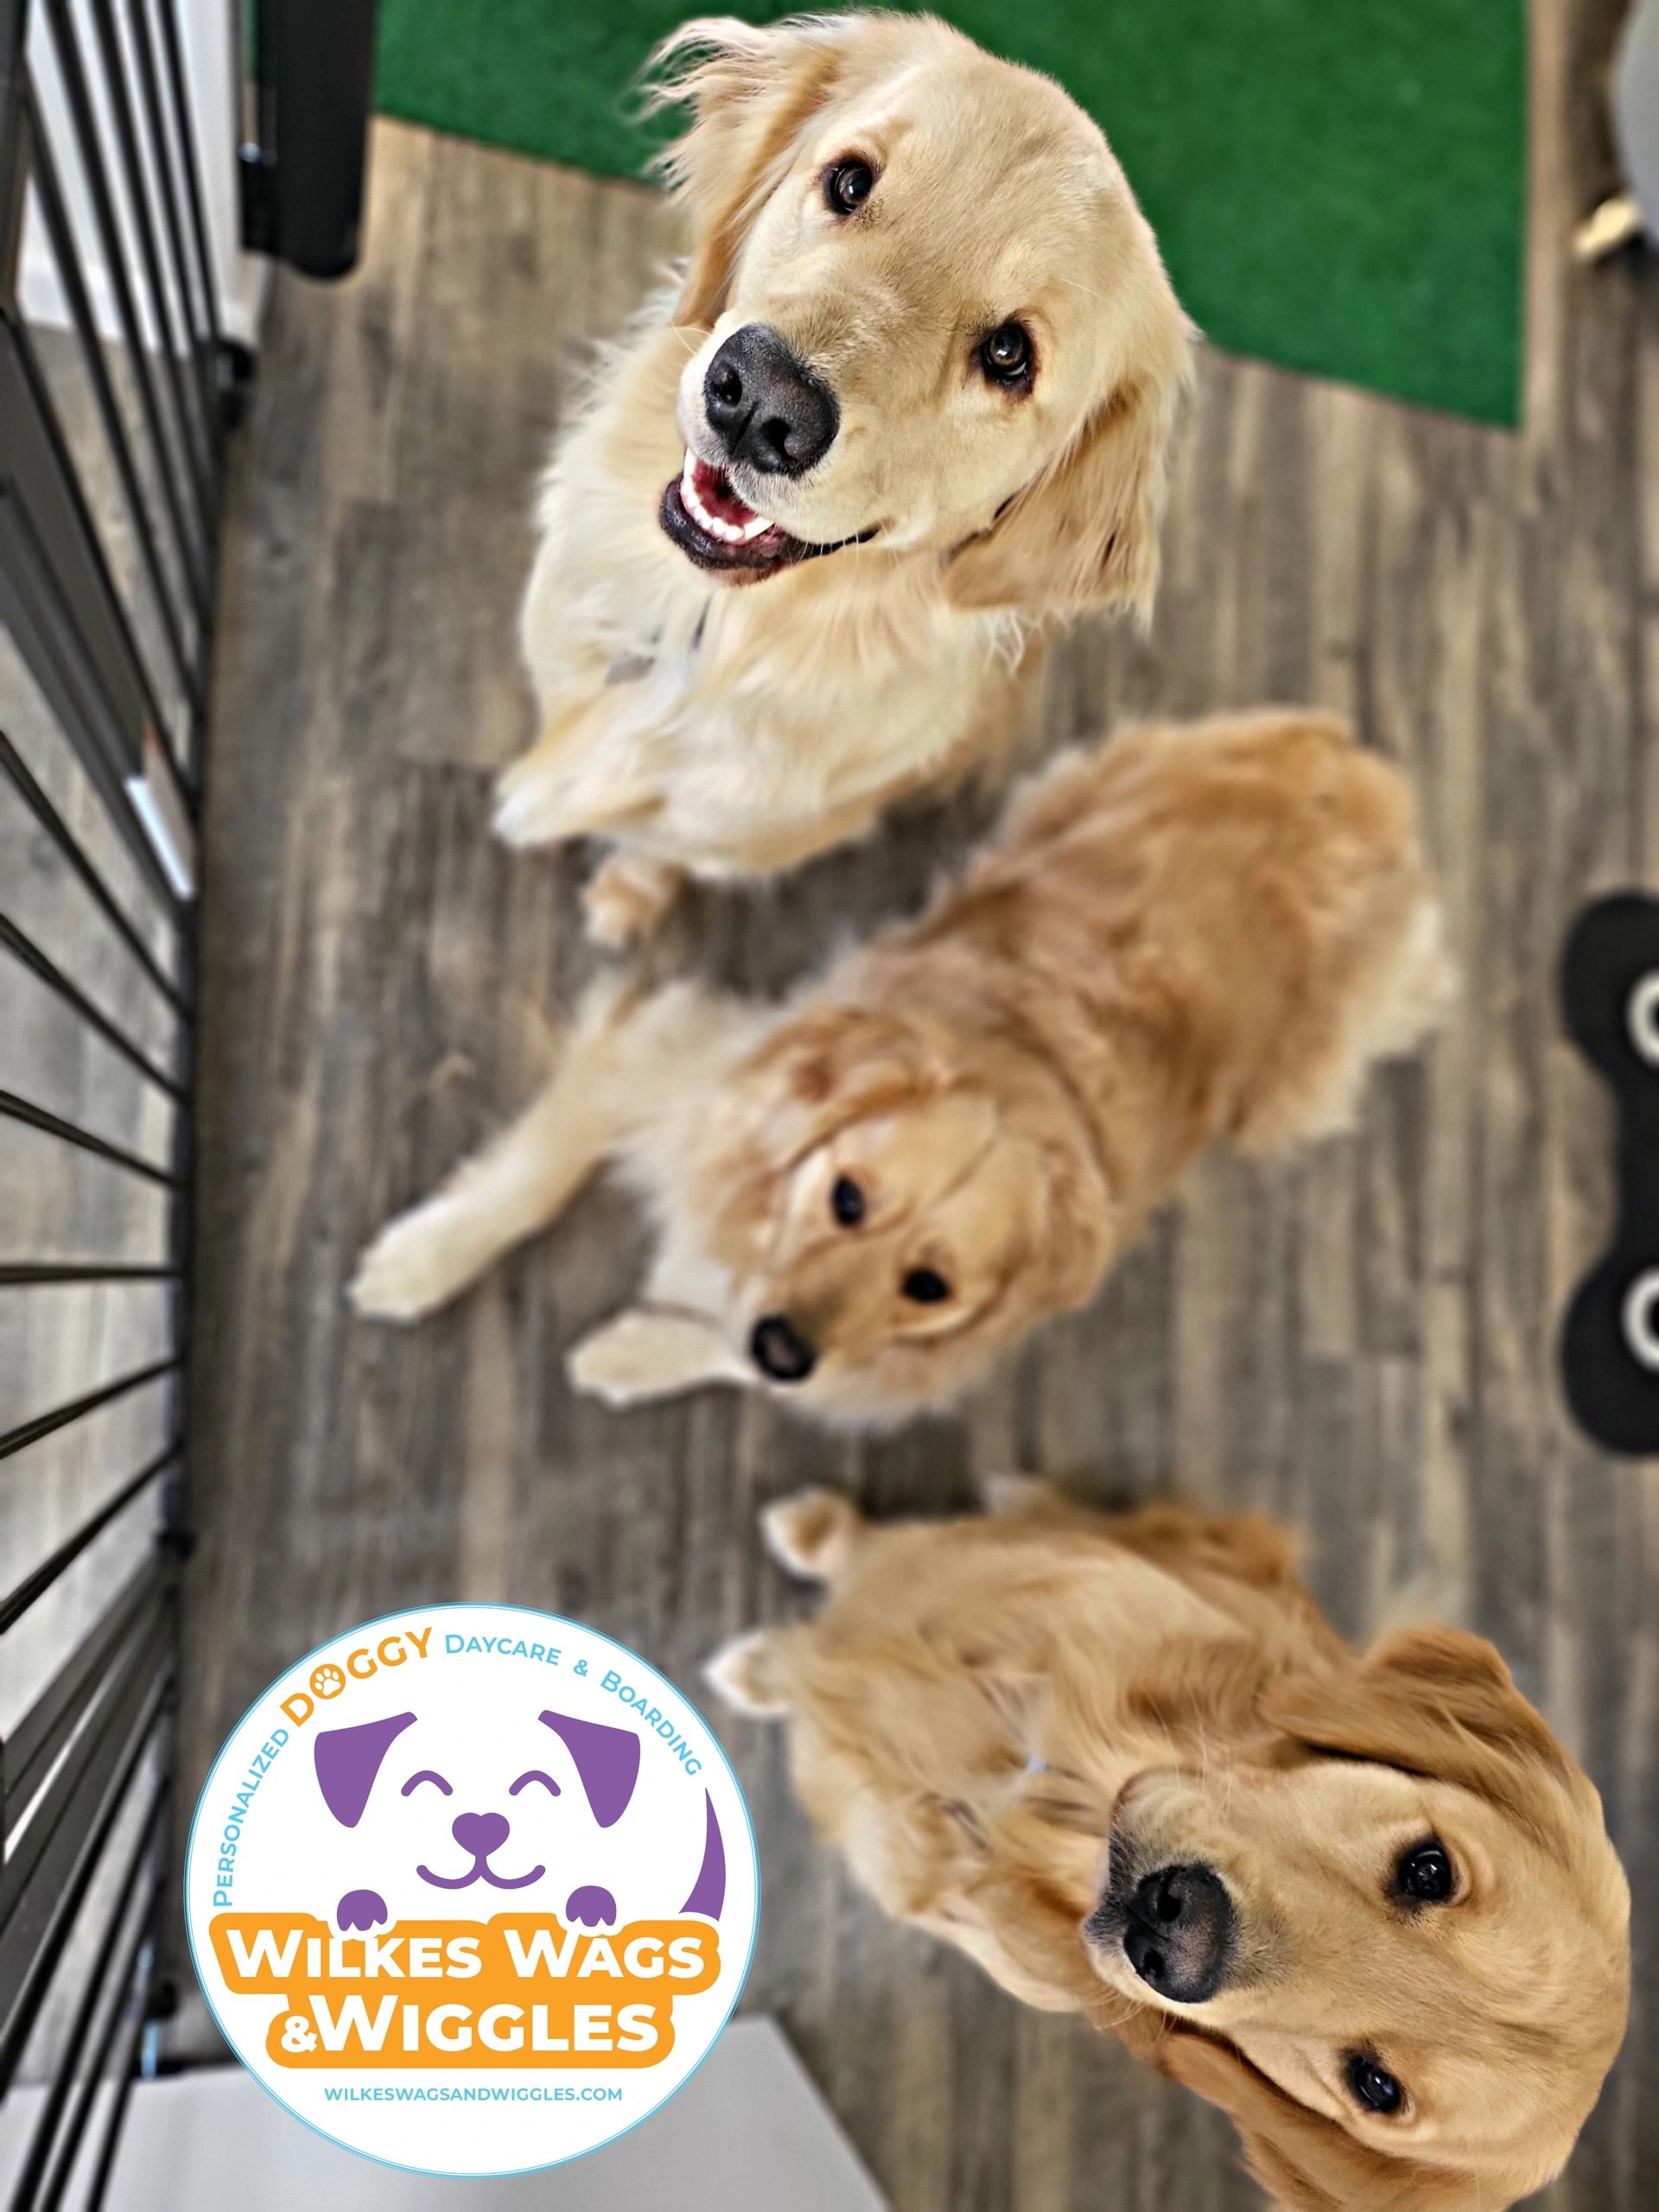 Activity Based Daycare is Fun for Your Dog! - Wags & Wiggles